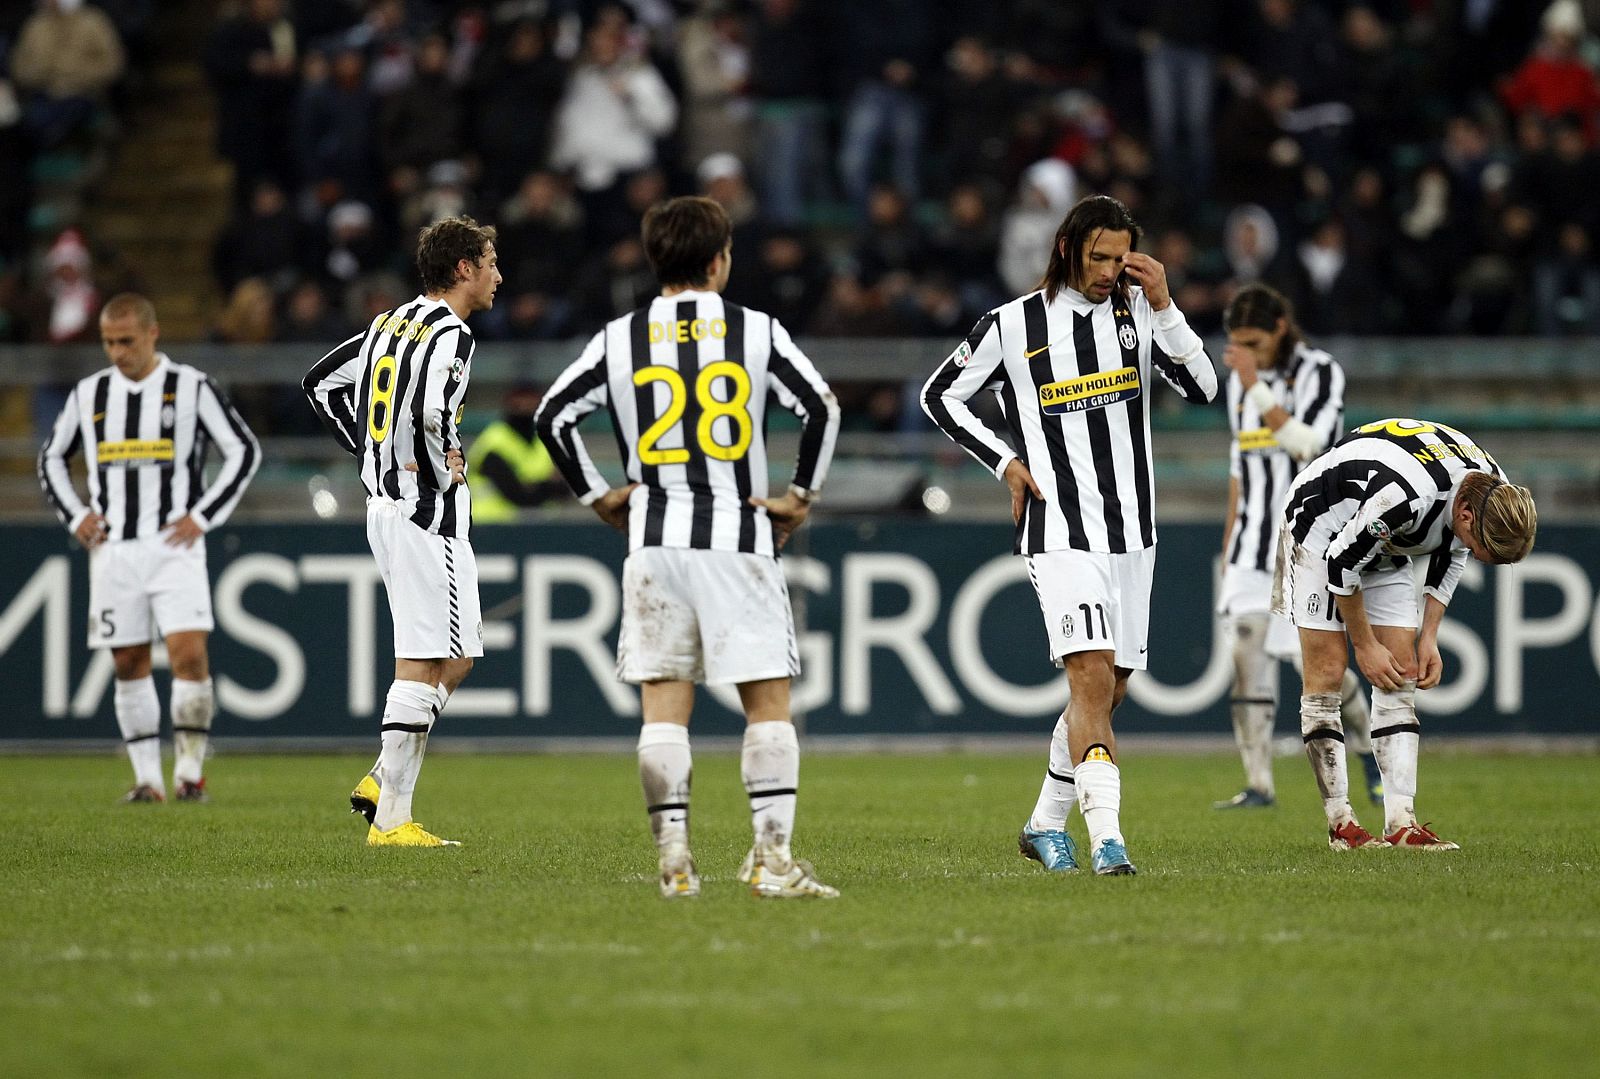 Juventus' players react after Bari's Almiron scored during their Italian Serie A soccer match in Bari